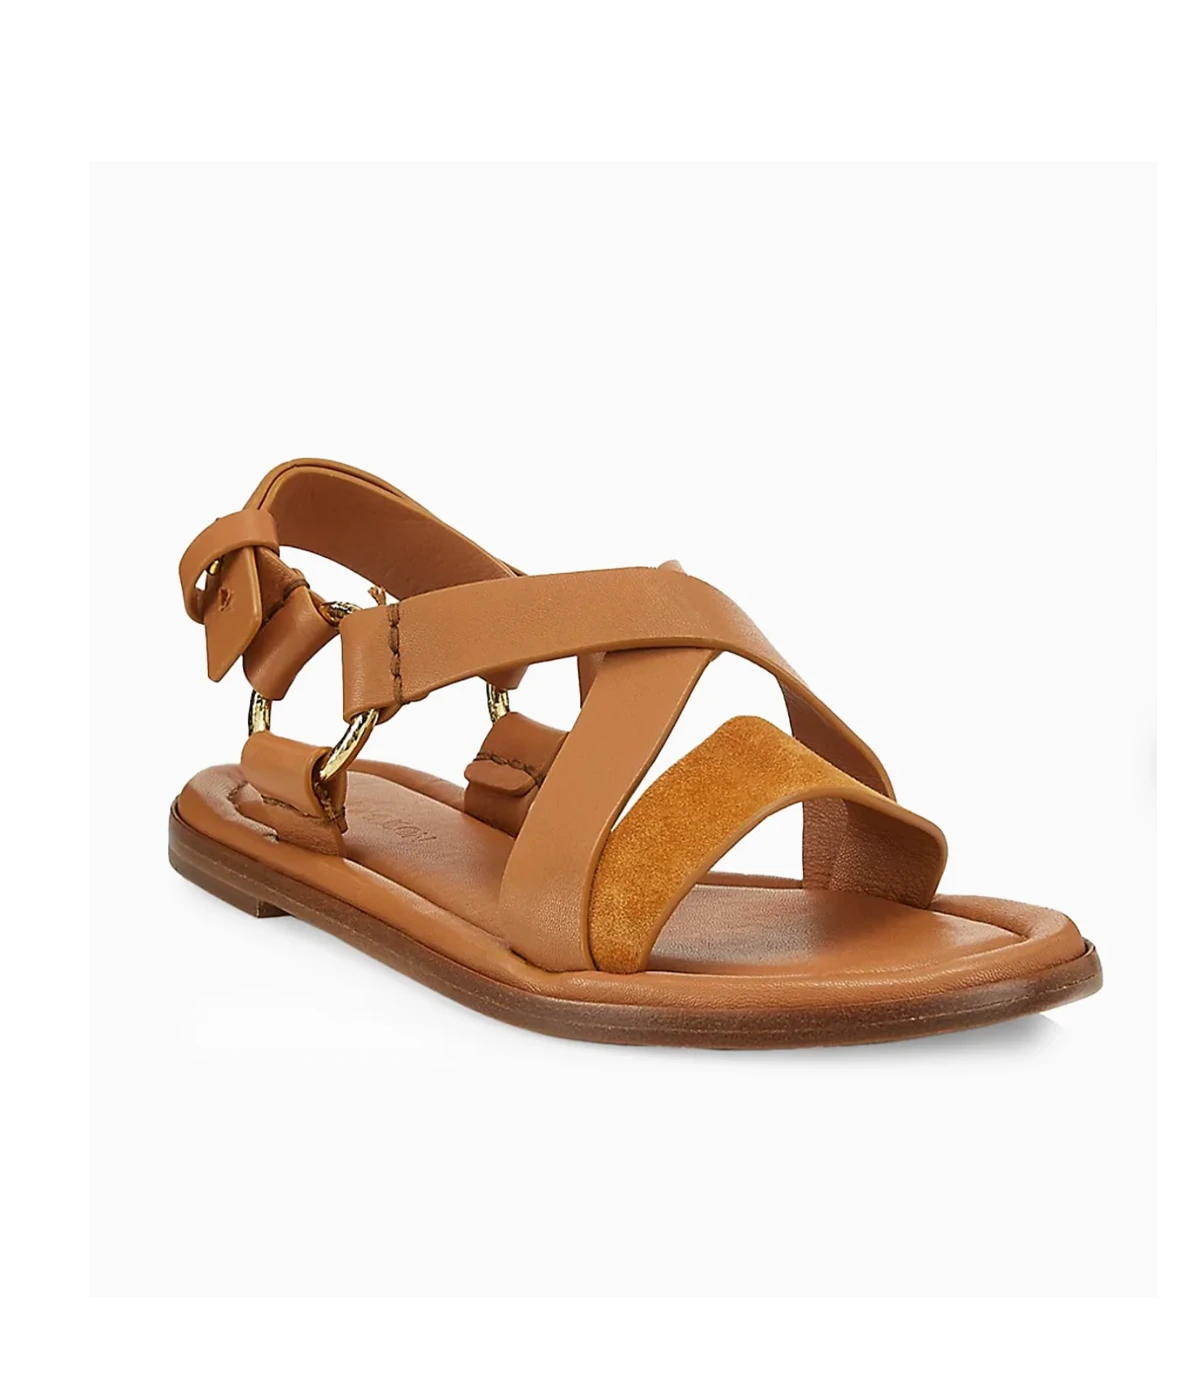 Audrey Sandals in Amber Brown